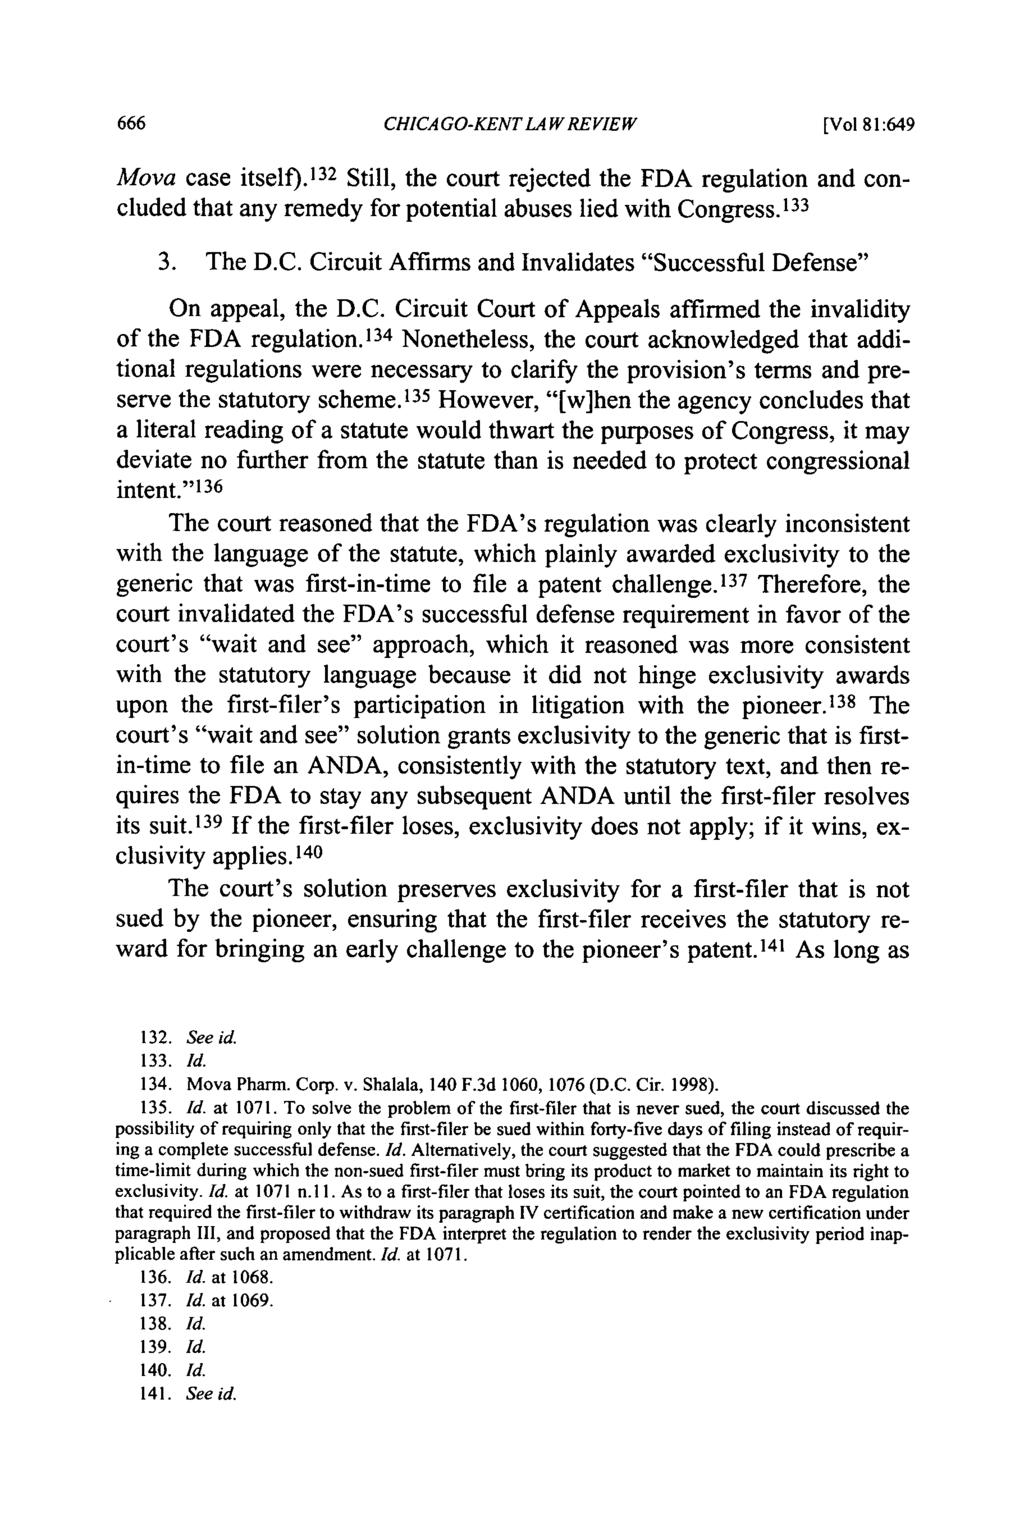 CHICAGO-KENT LA WREVIEW [Vol 81:649 Mova case itself). 132 Still, the court rejected the FDA regulation and concluded that any remedy for potential abuses lied with Congress. 133 3. The D.C. Circuit Affirms and Invalidates "Successful Defense" On appeal, the D.